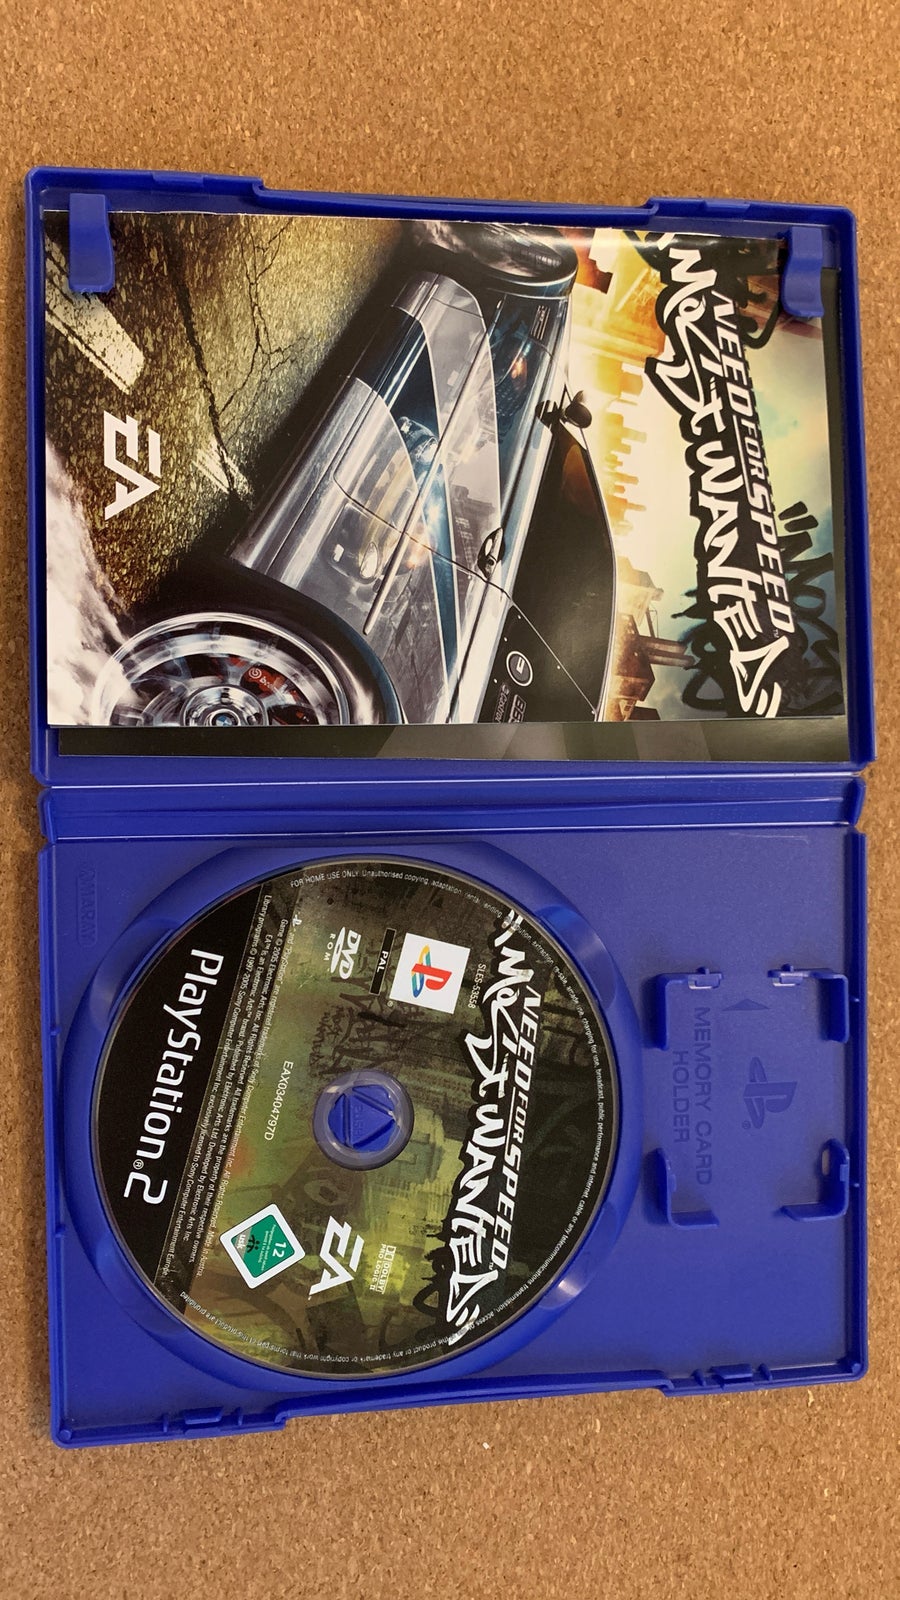 Need for speed most wanted, PS2, racing